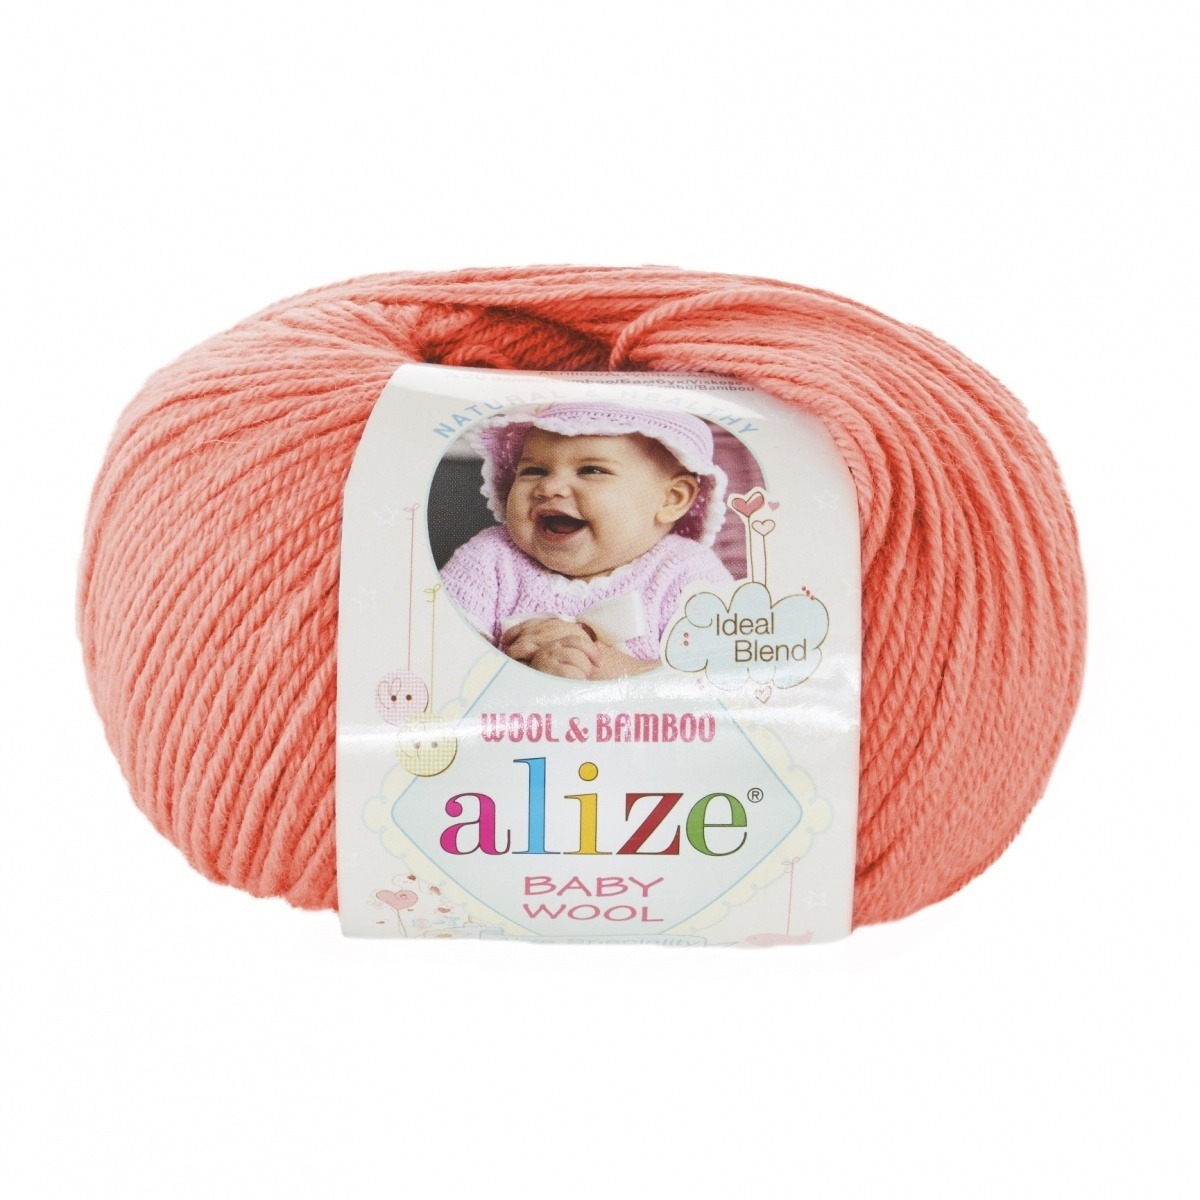 Alize "Baby wool" (619)